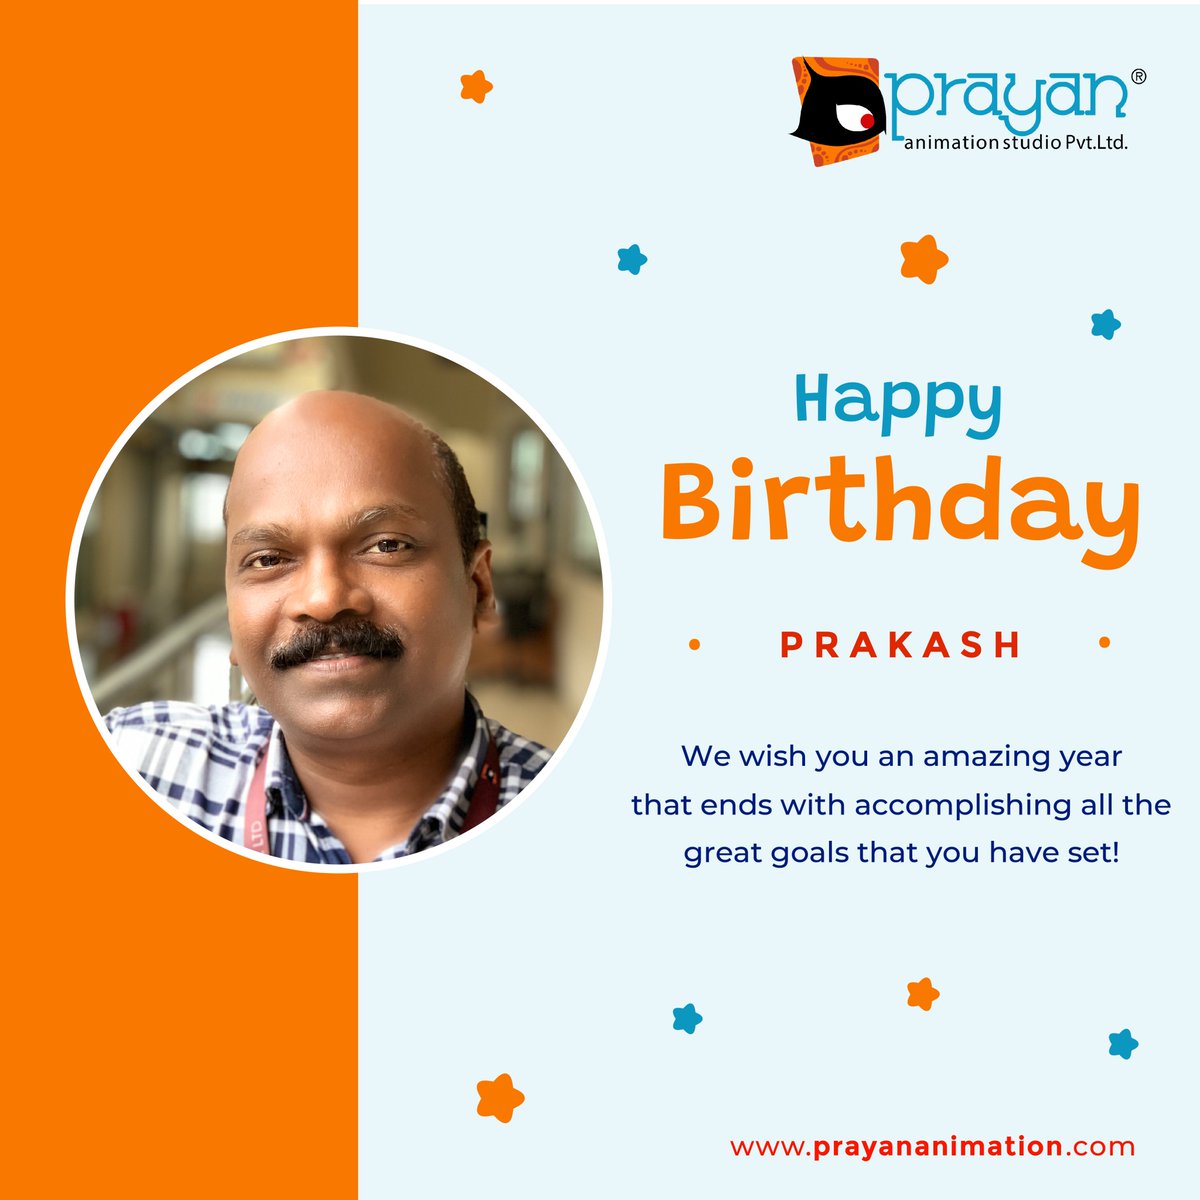 Wishing you a wonderful #Birthday and all the most amazing things on your Big Day! Here’s to a bright, healthy, and exciting future!

#HappyBirthday #BirthdayWishes #PartyTime #BirthdayLove #MakingMemories #SpecialDay #HBD #birthdaywish #Prayan #employeebirthday #PrayanAnimation